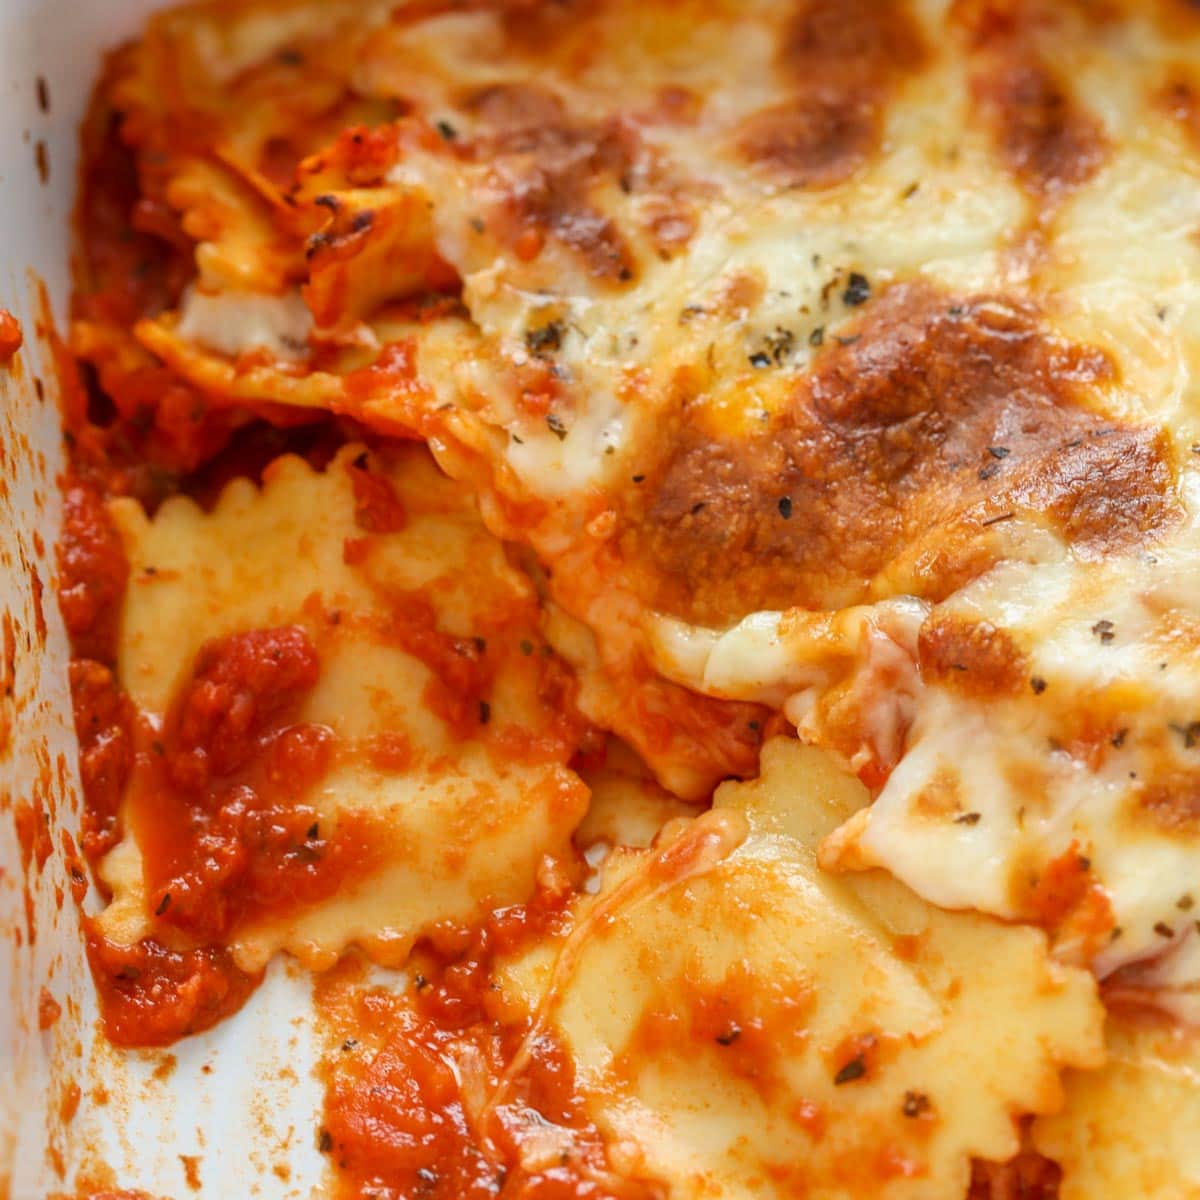 Halloween dinner ideas - cheesy baked ravioli with a scoop missing.